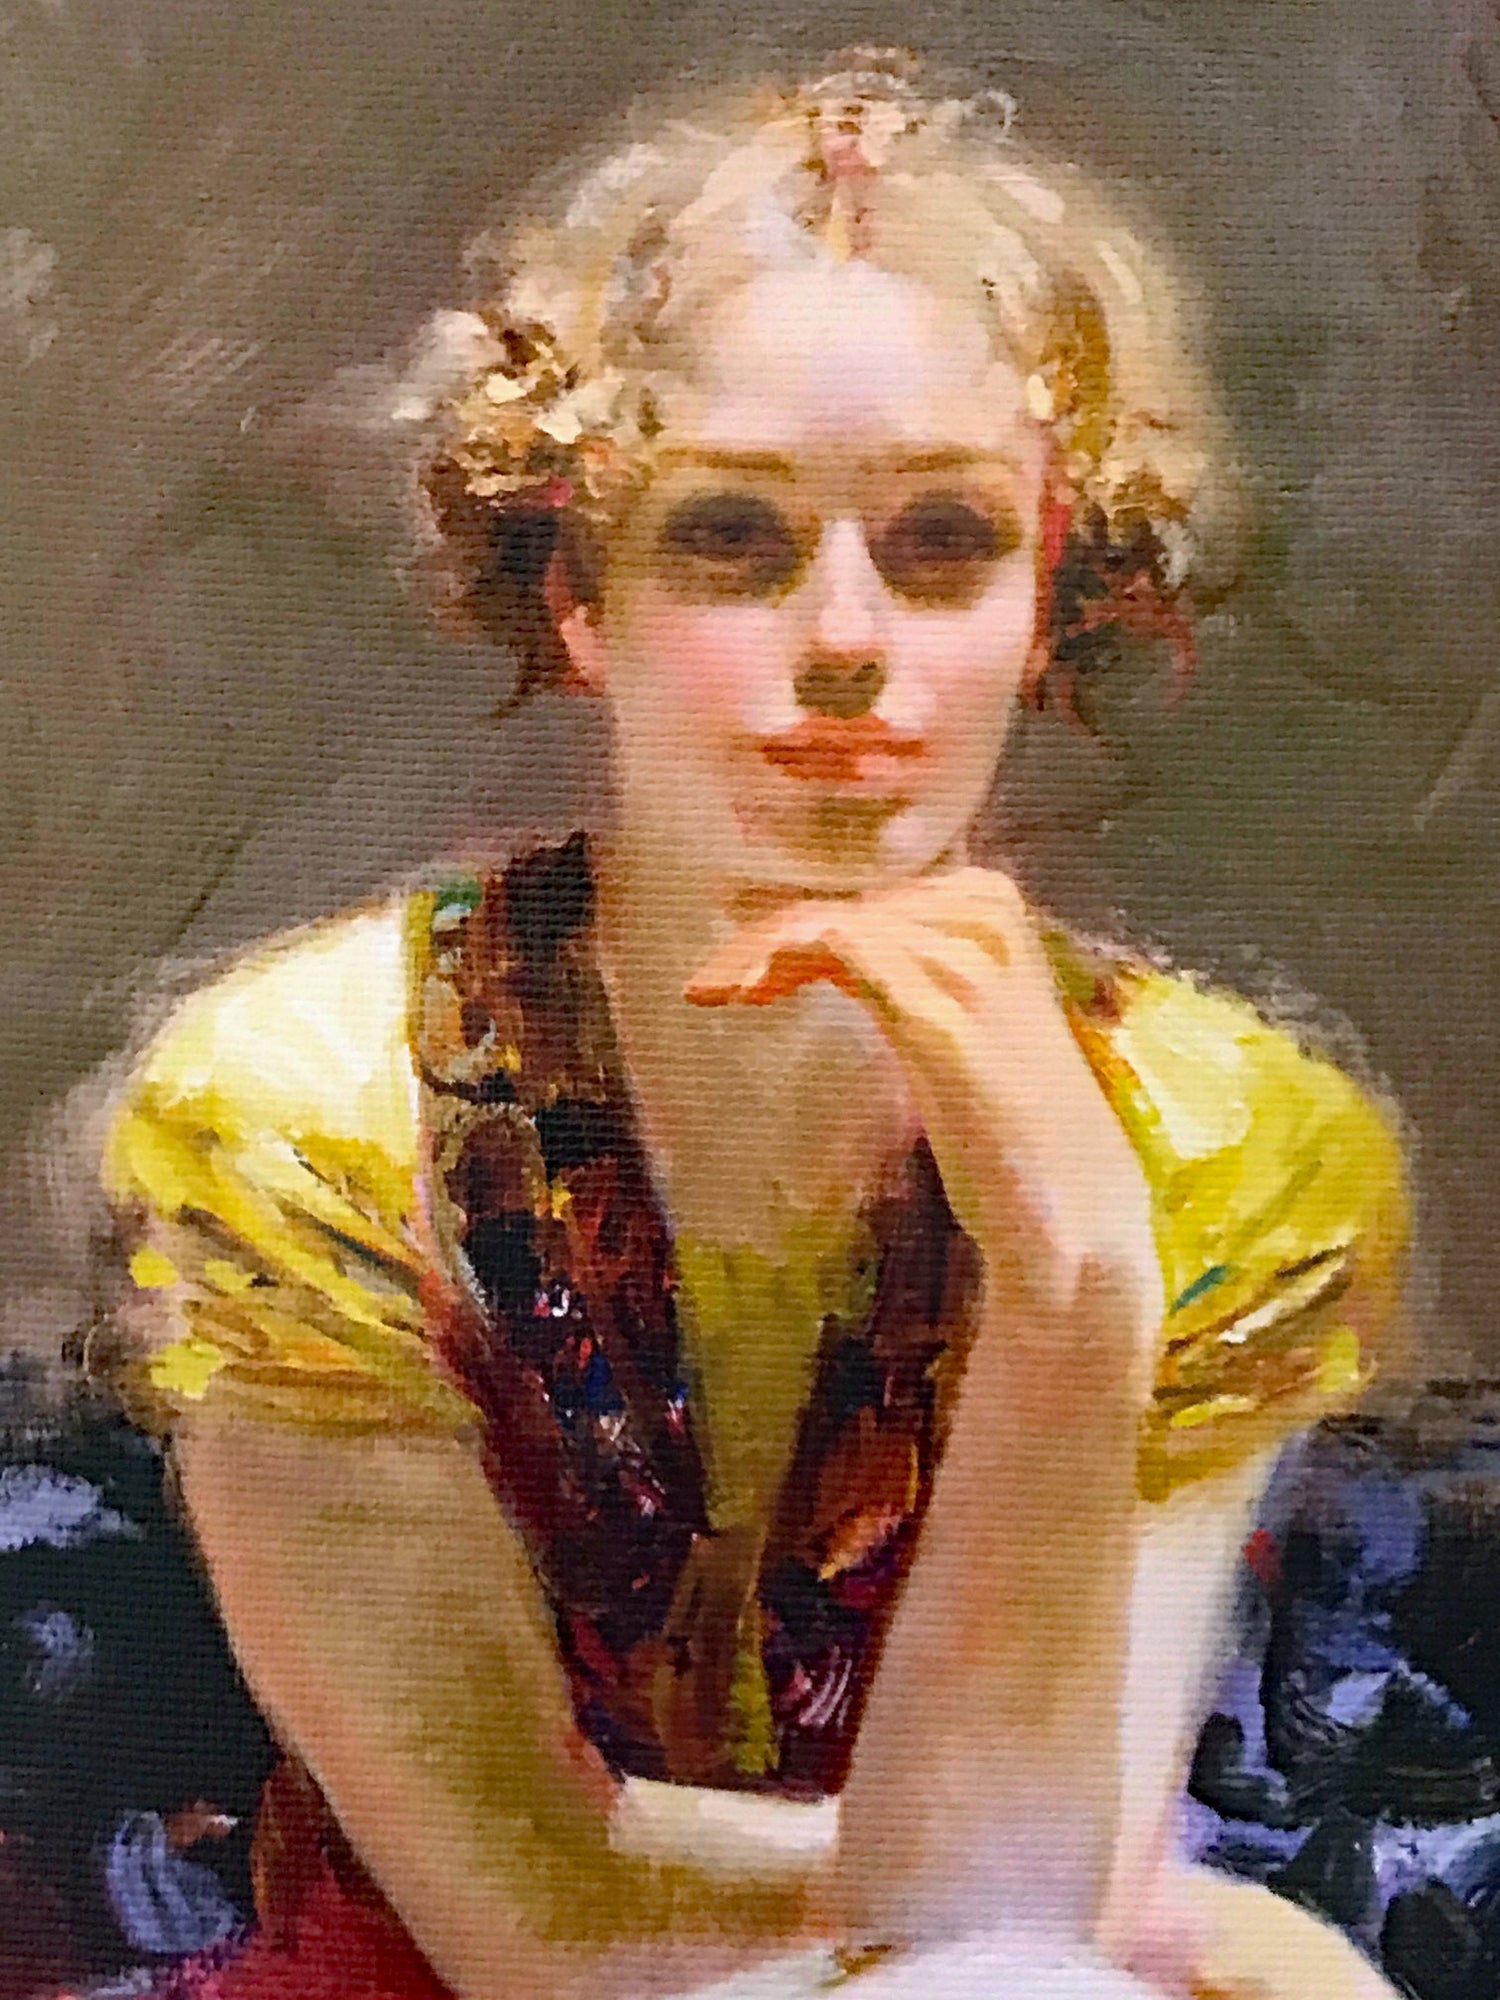 Enchantment Pino Daeni Canvas Giclée Print Artist Hand Signed and Numbered